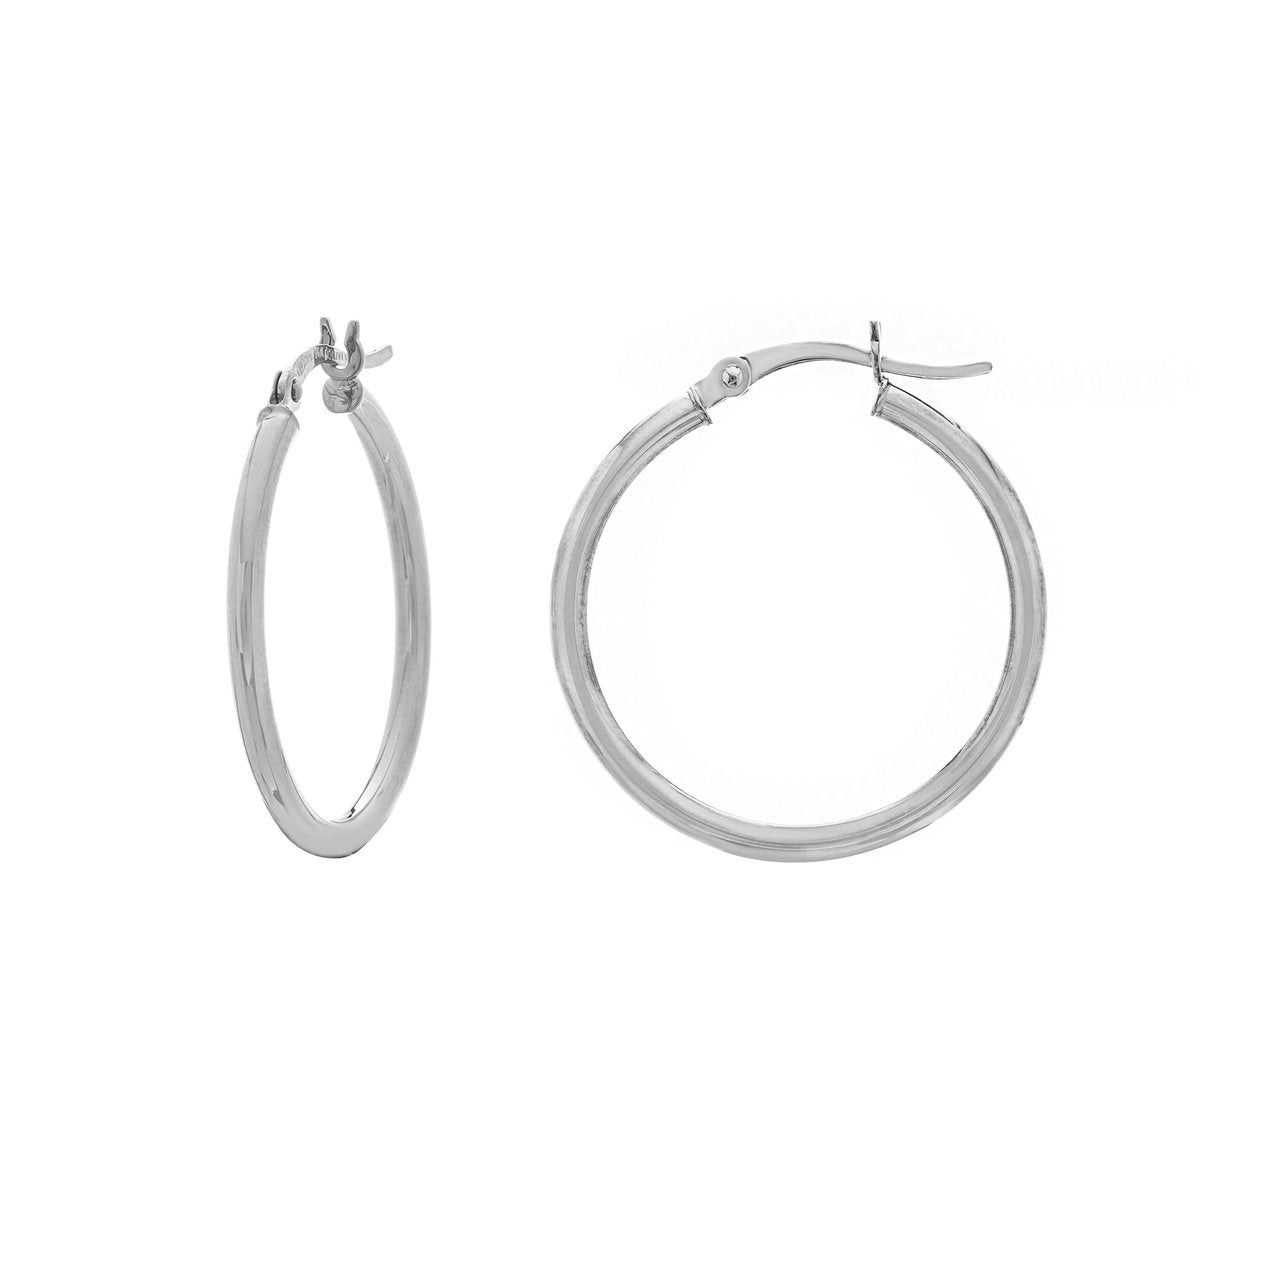 Sabel Everyday Collection 14k White Gold Hoop Earrings